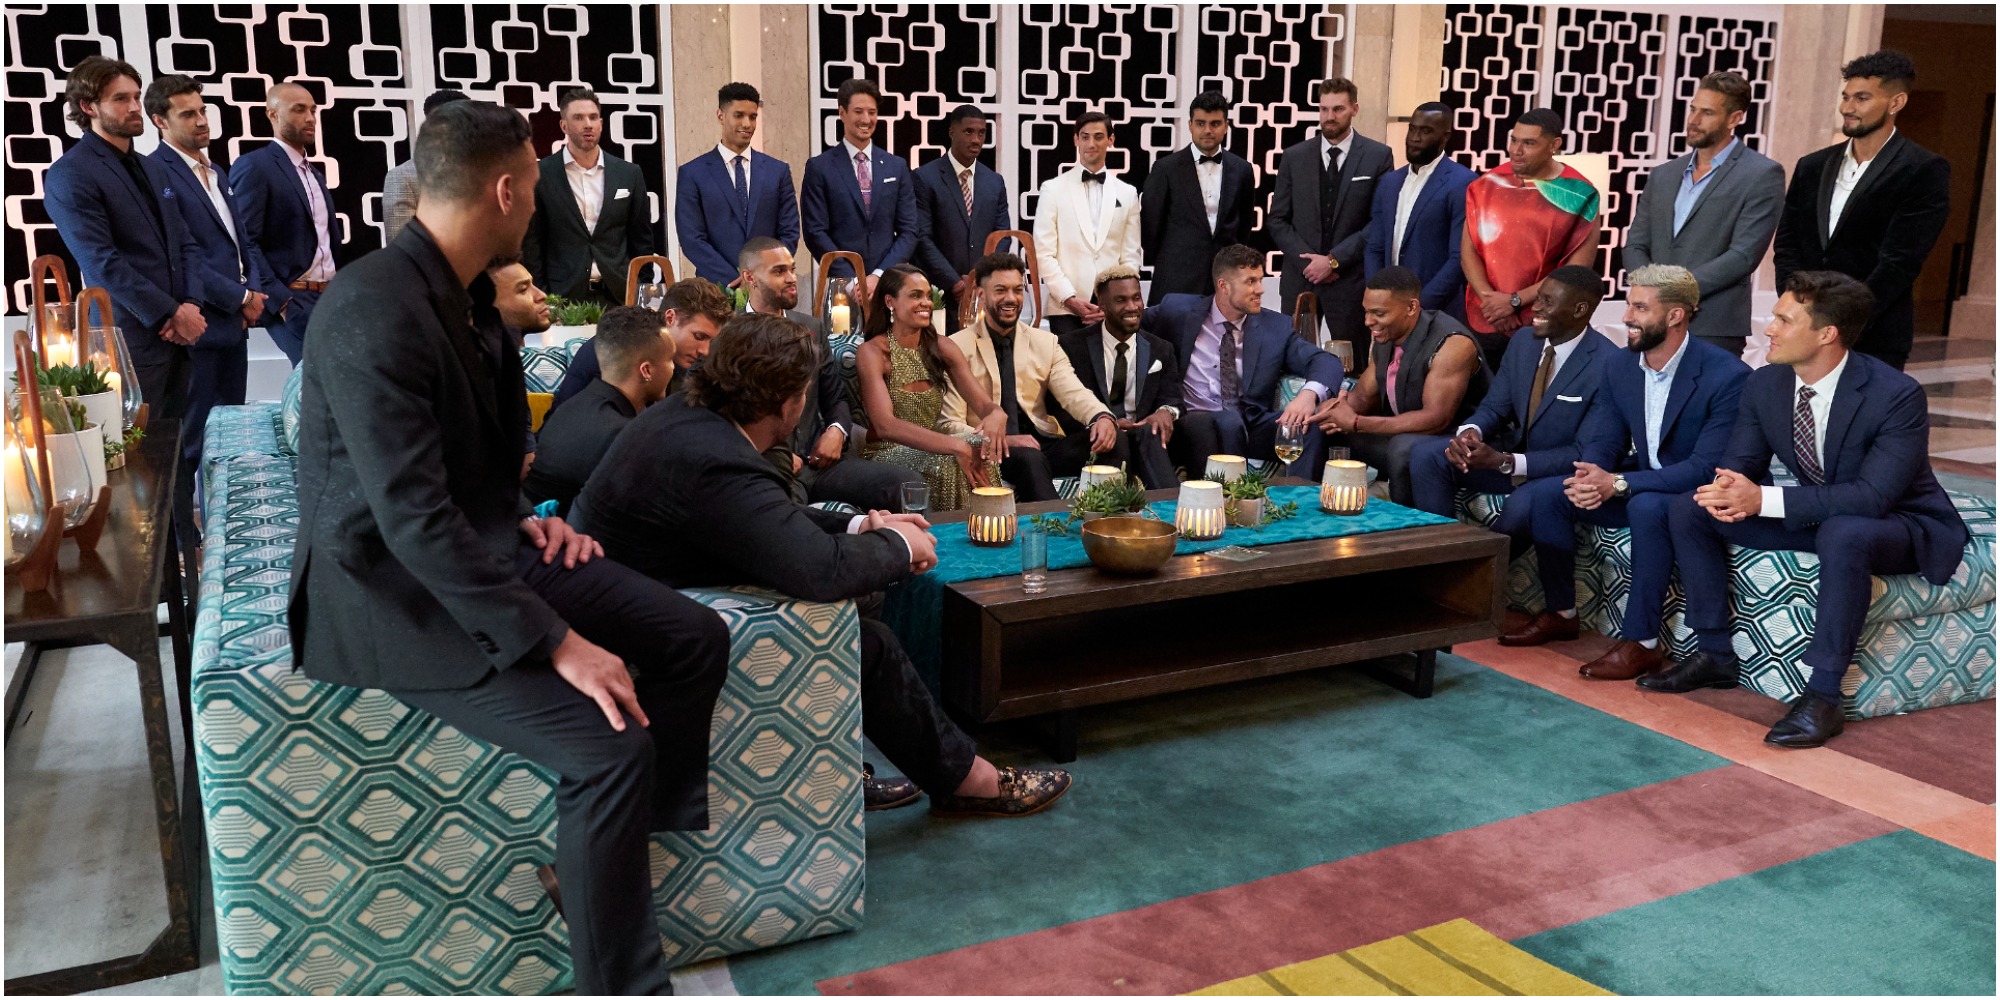 The cast of "The Bachelorette" is seated on the set of the ABC dating show.